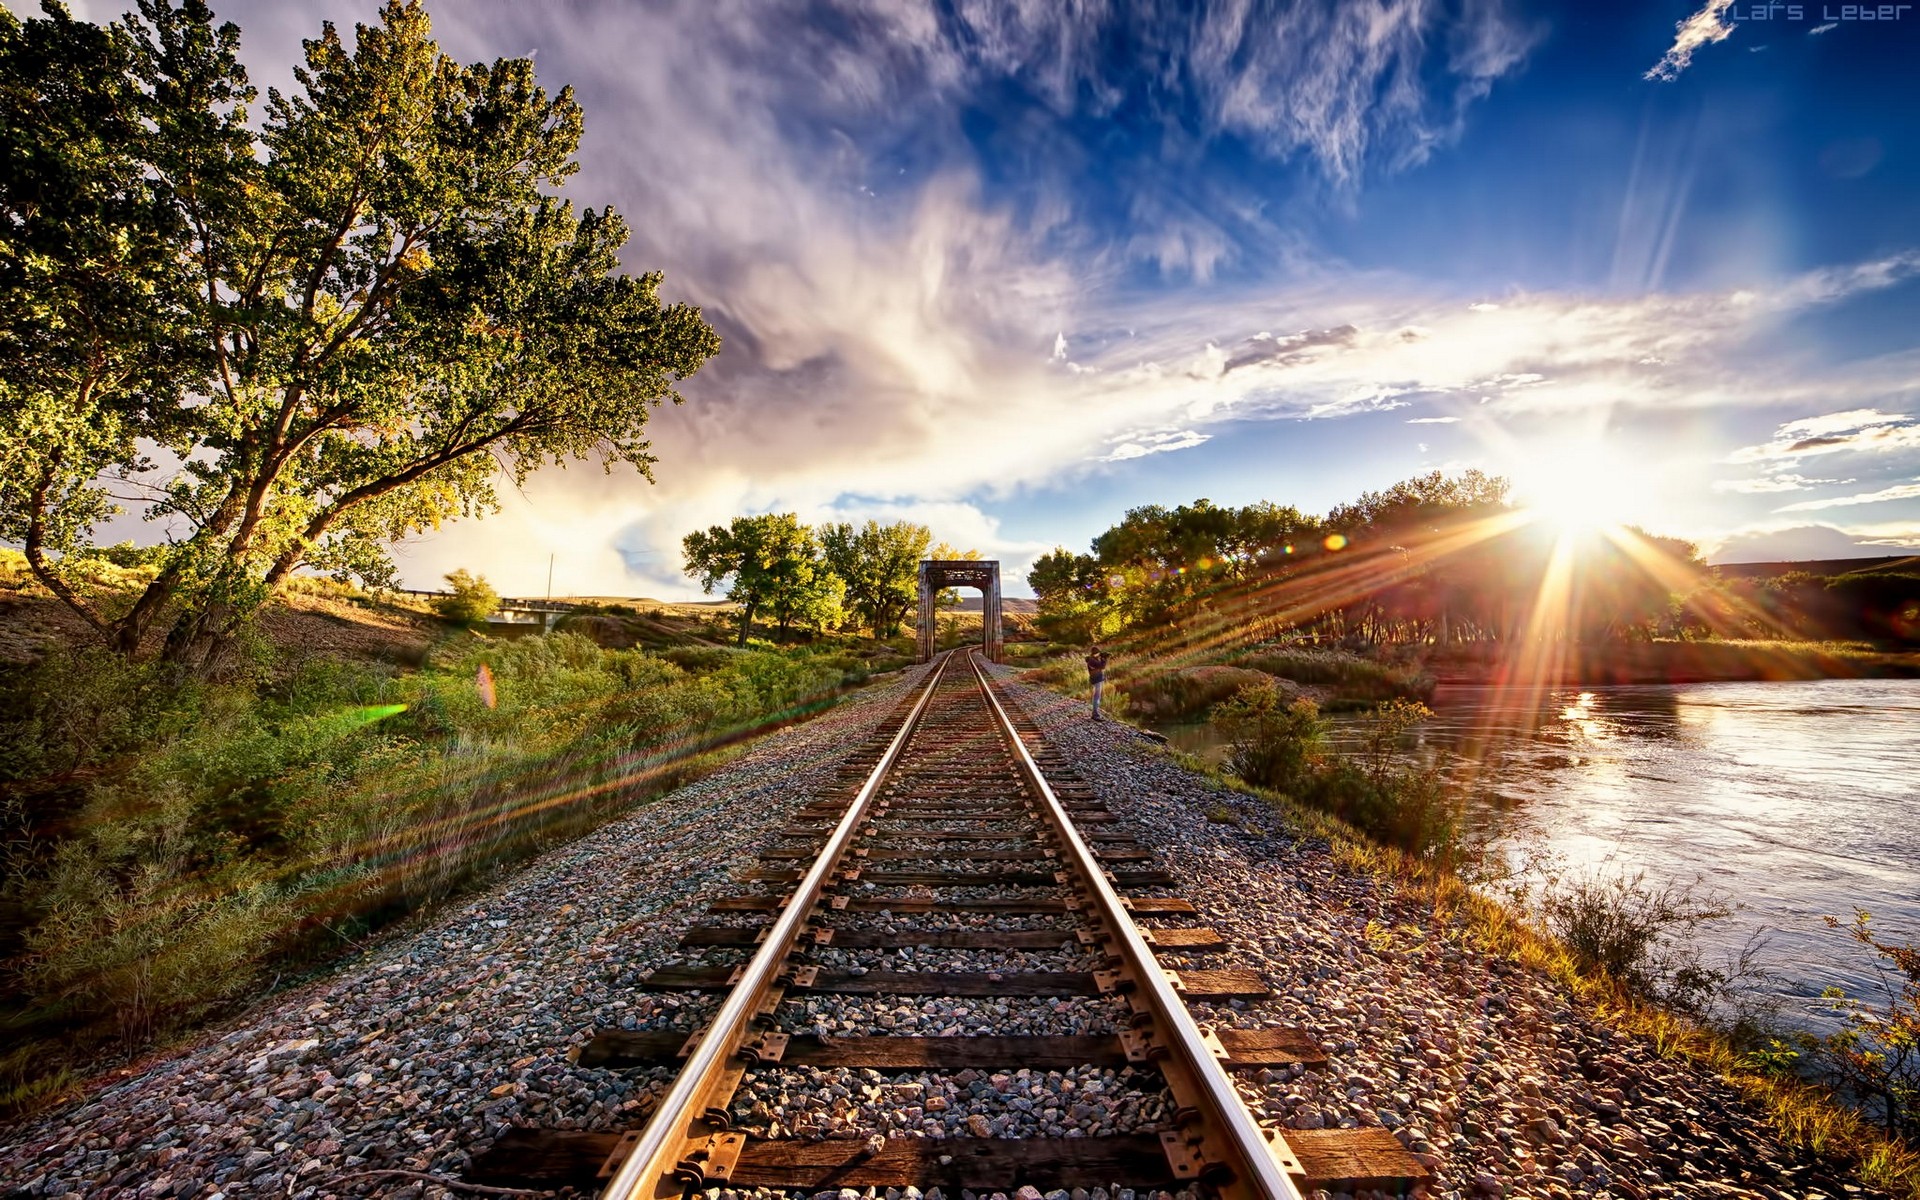 General 1920x1200 nature landscape sunset tracks train sun rays trees clouds river HDR vibrant sunlight